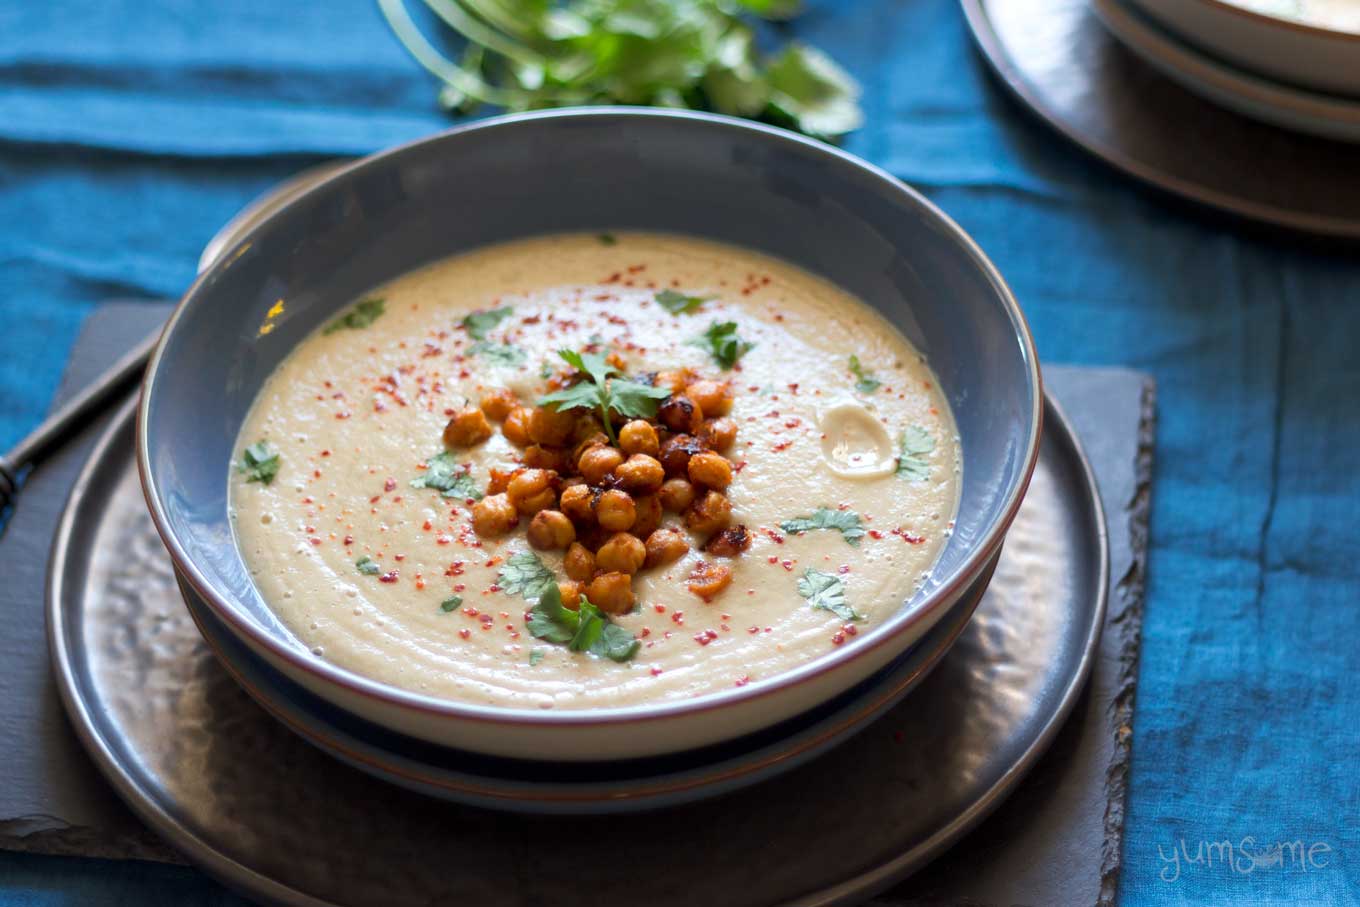 one bowl of Gingery Parsnip Soup with Spicy Roasted Chickpeas | yumsome.com